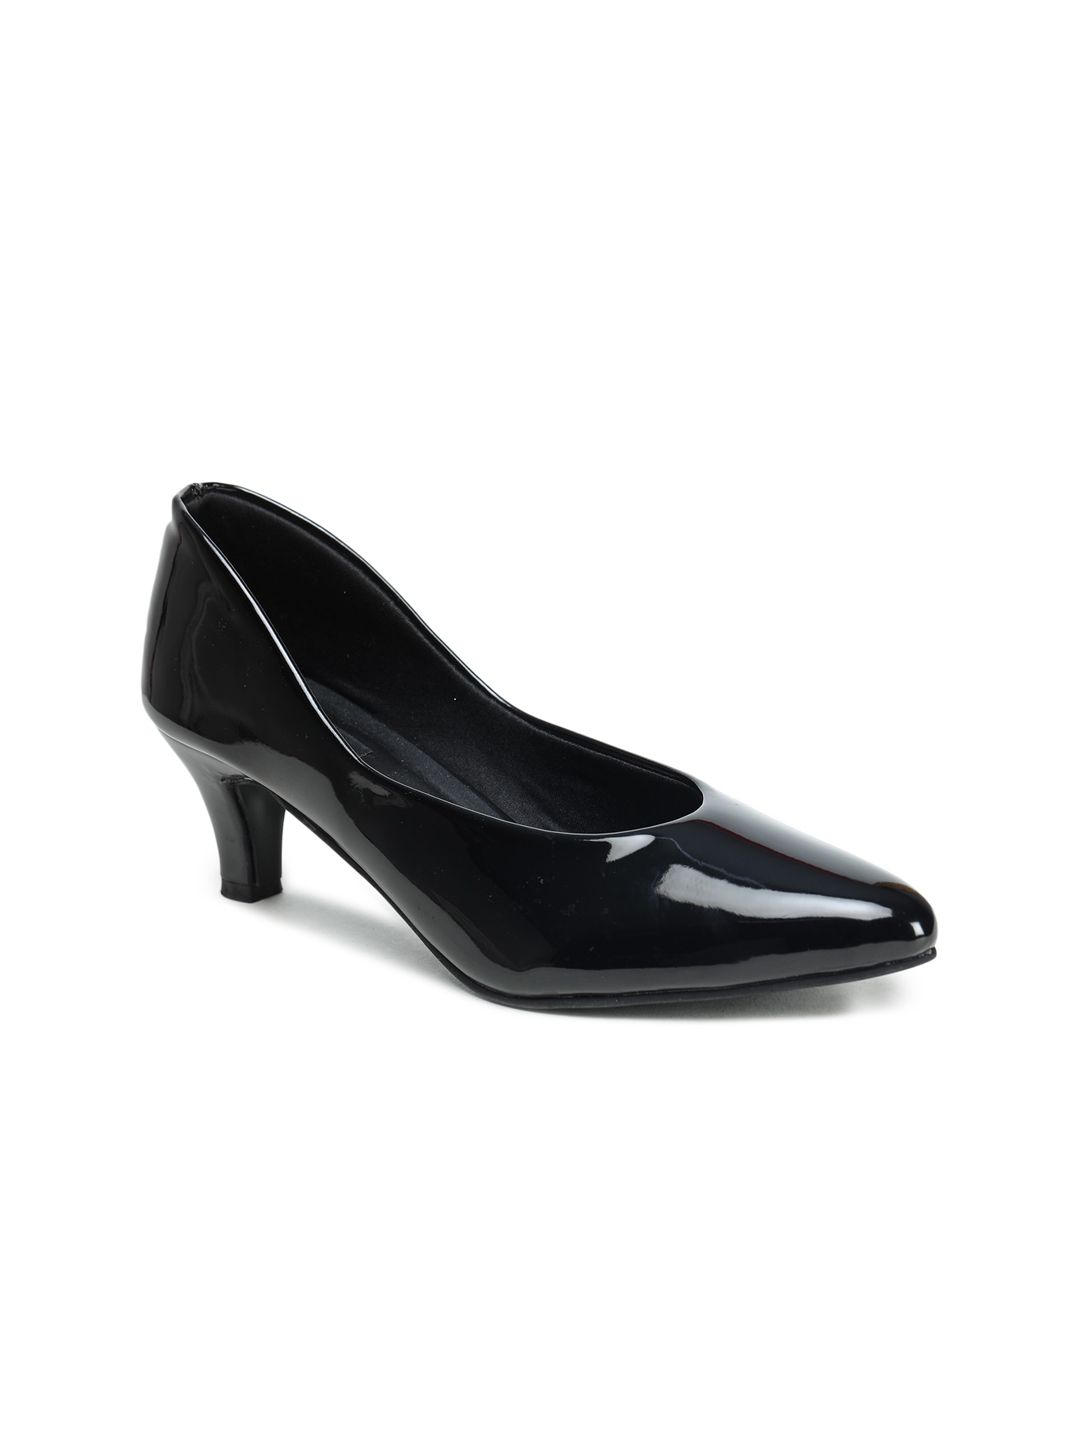 Walkfree Woman Black Pumps Price in India